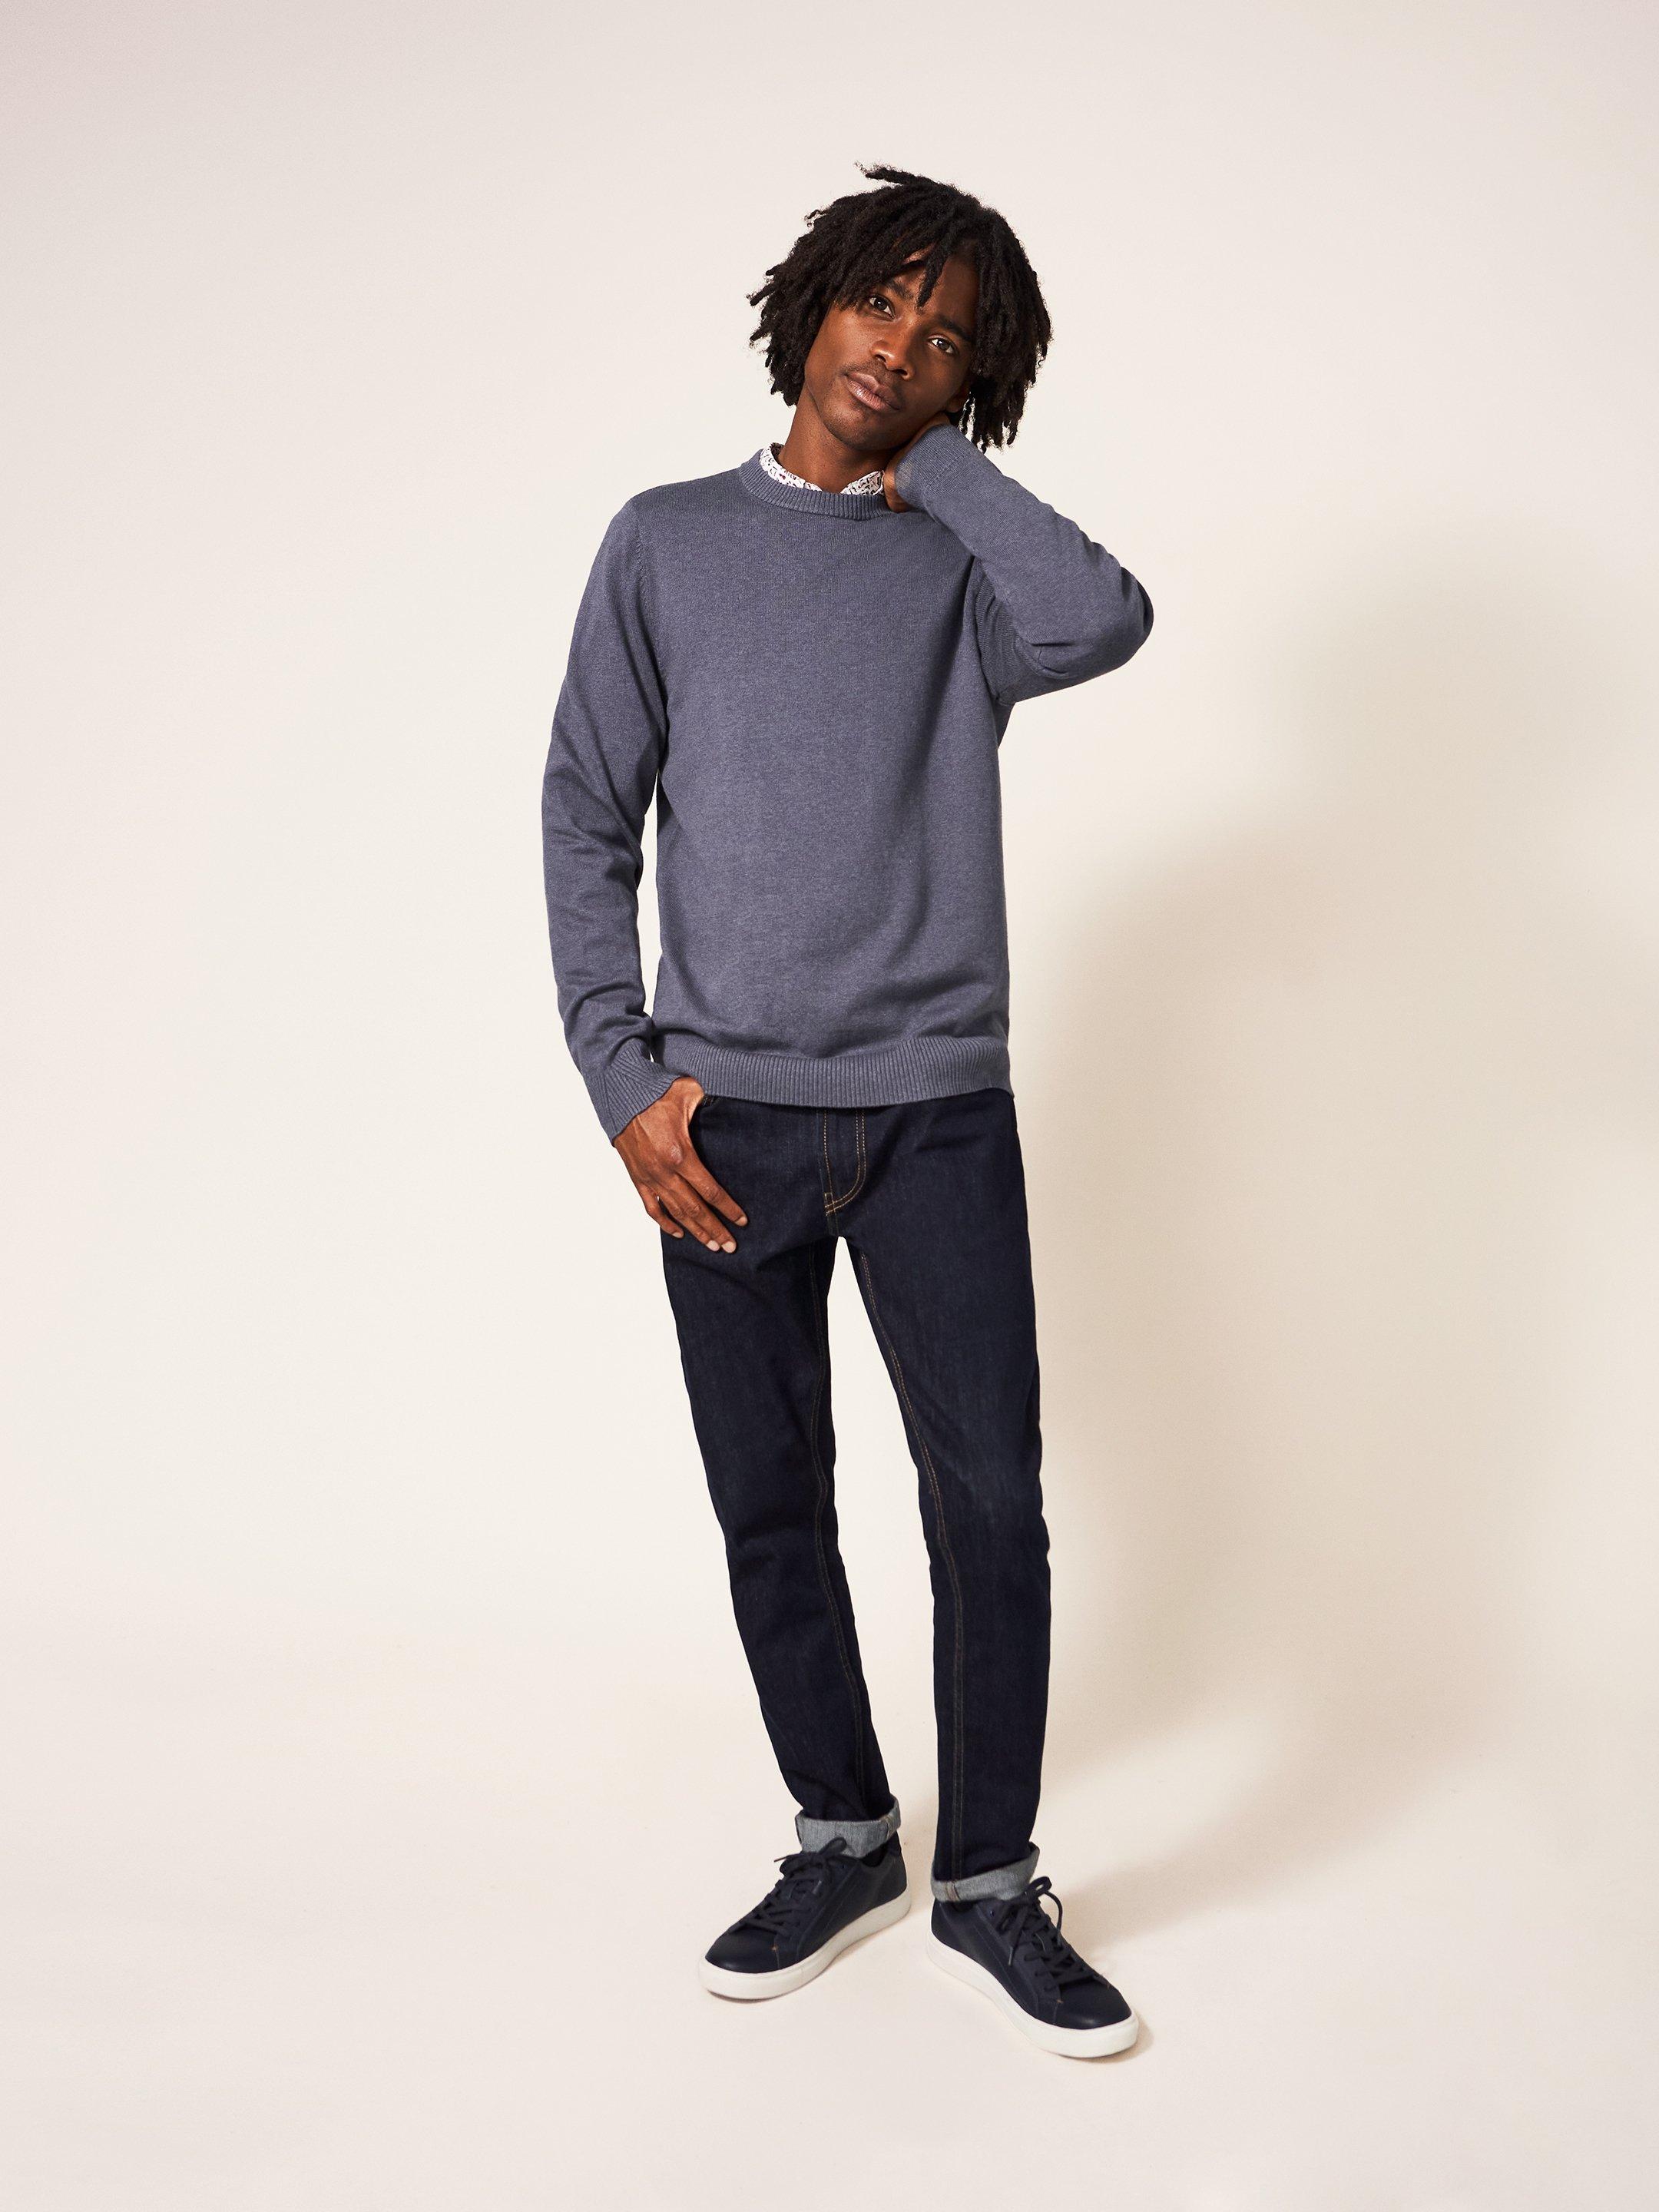 Newport Crew Knit in CHARC GREY - MODEL FRONT